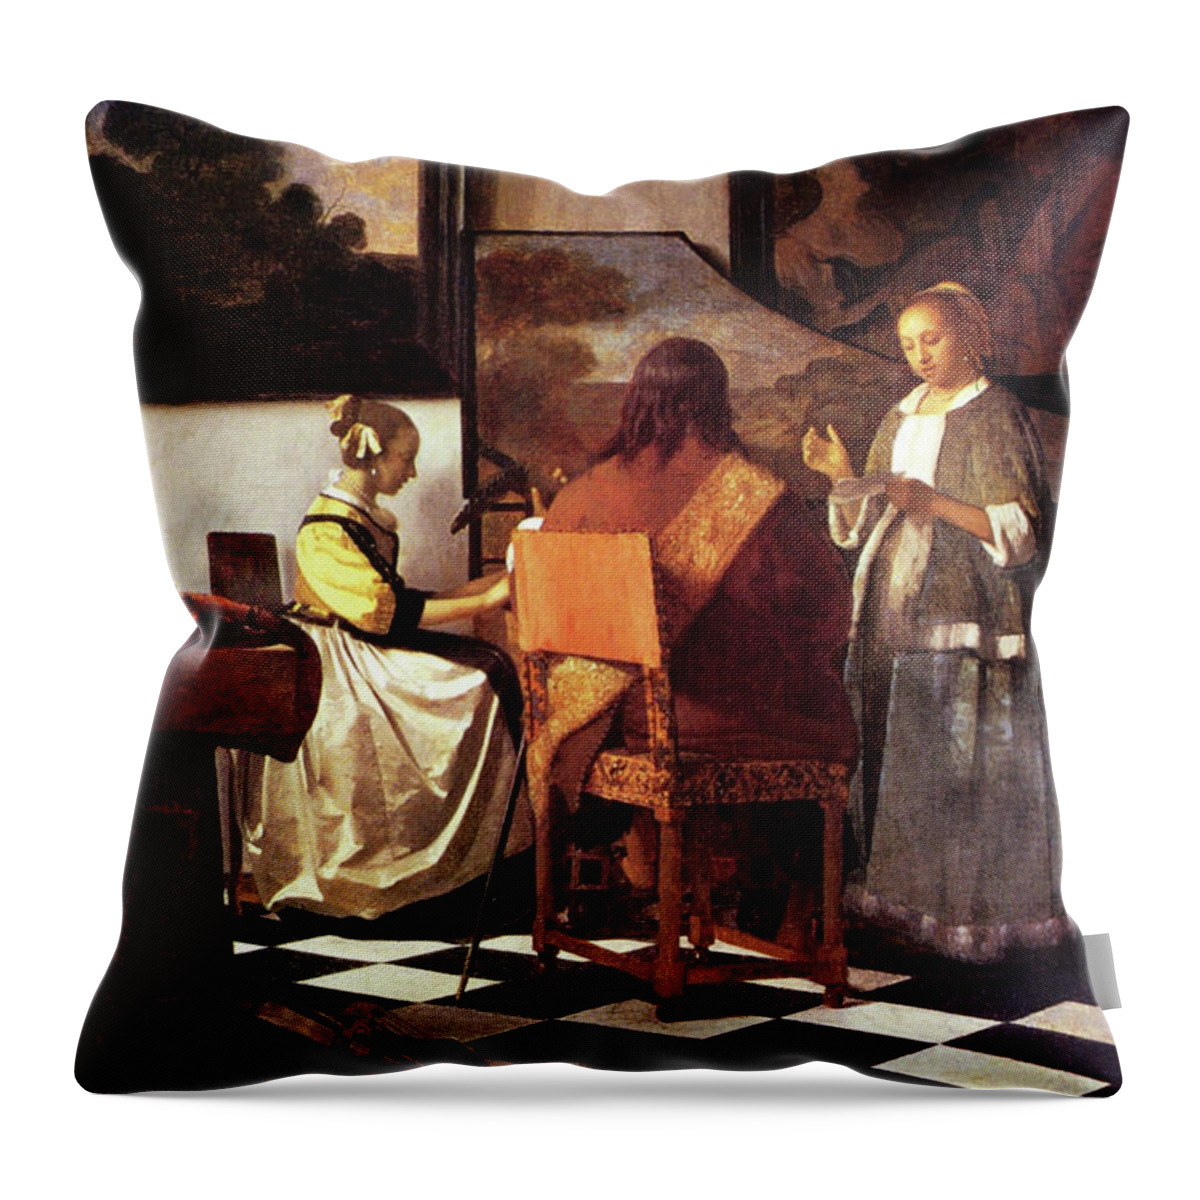 Renaissance Throw Pillow featuring the painting Musical Trio by Johannes Vermeer